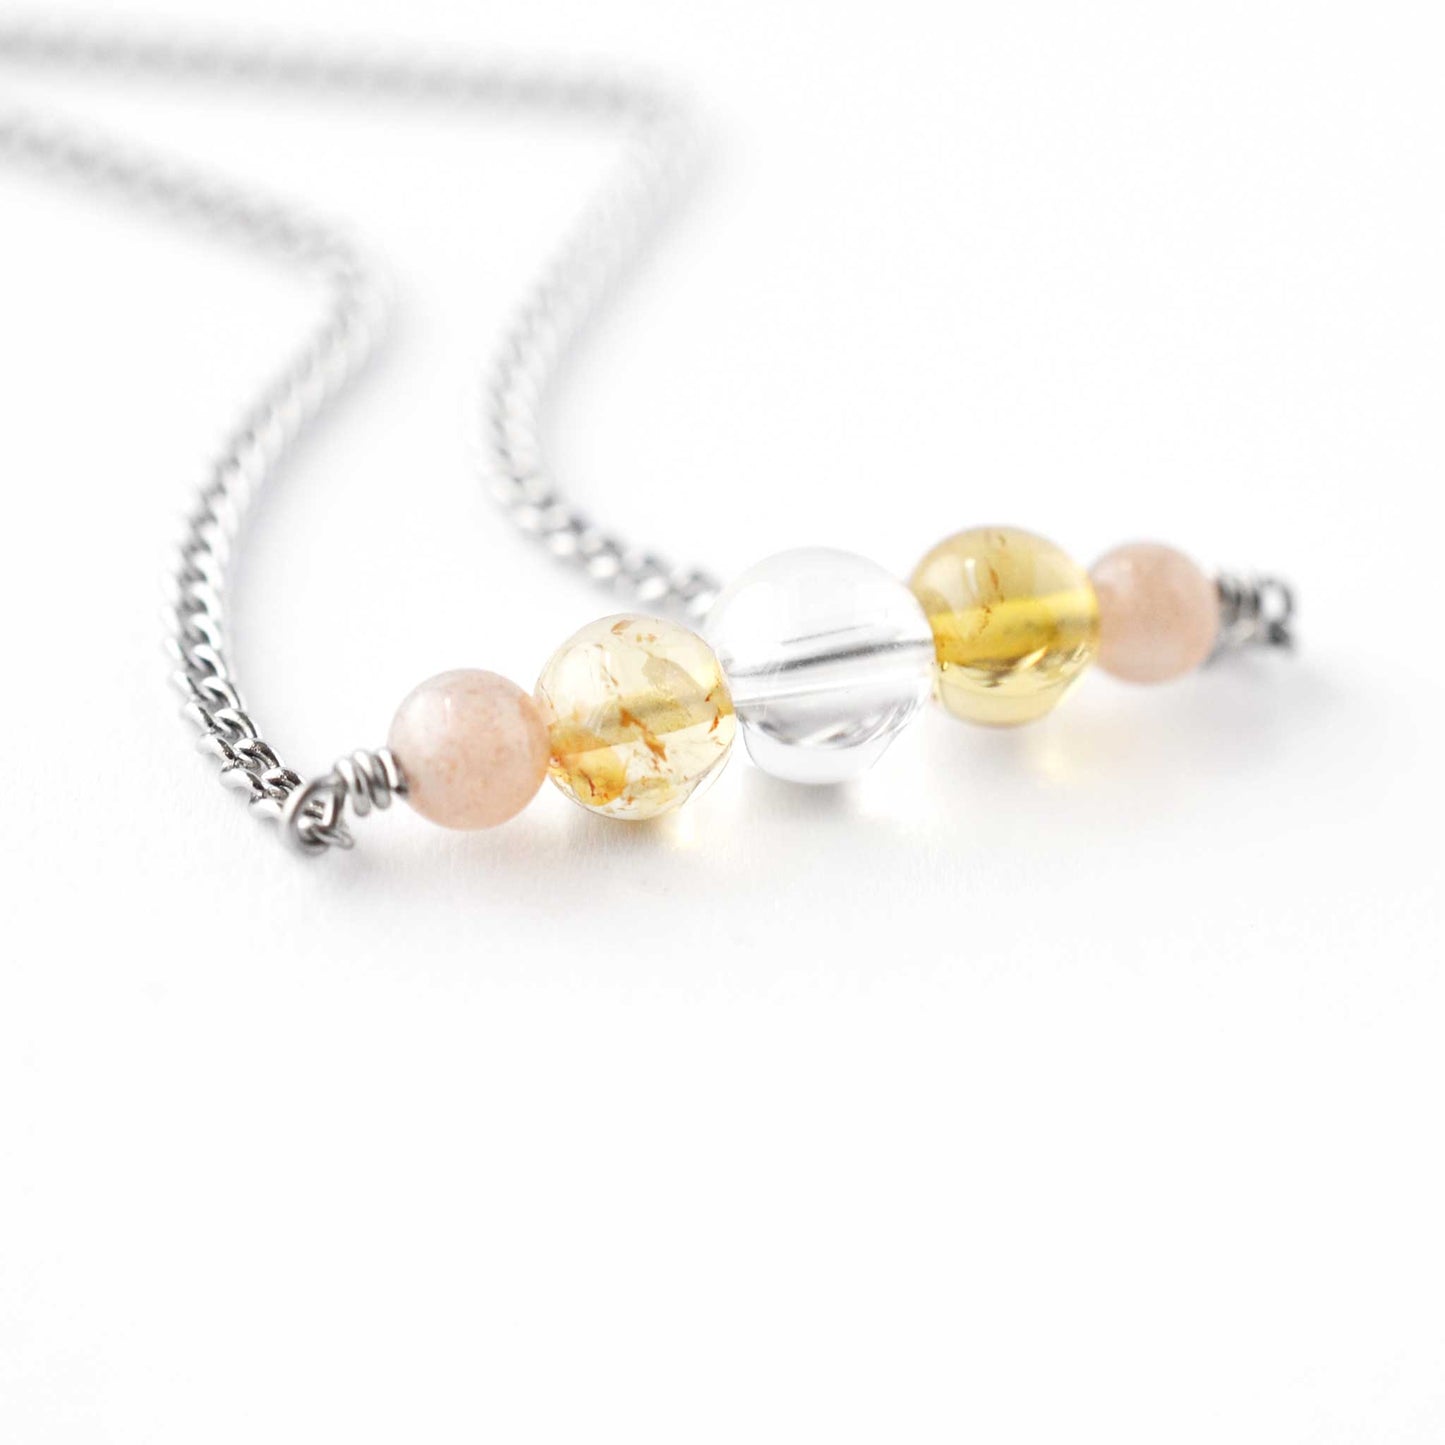 Close up of Sunstone, Citrine & Rock Crystal gemstones on stainless steel chain